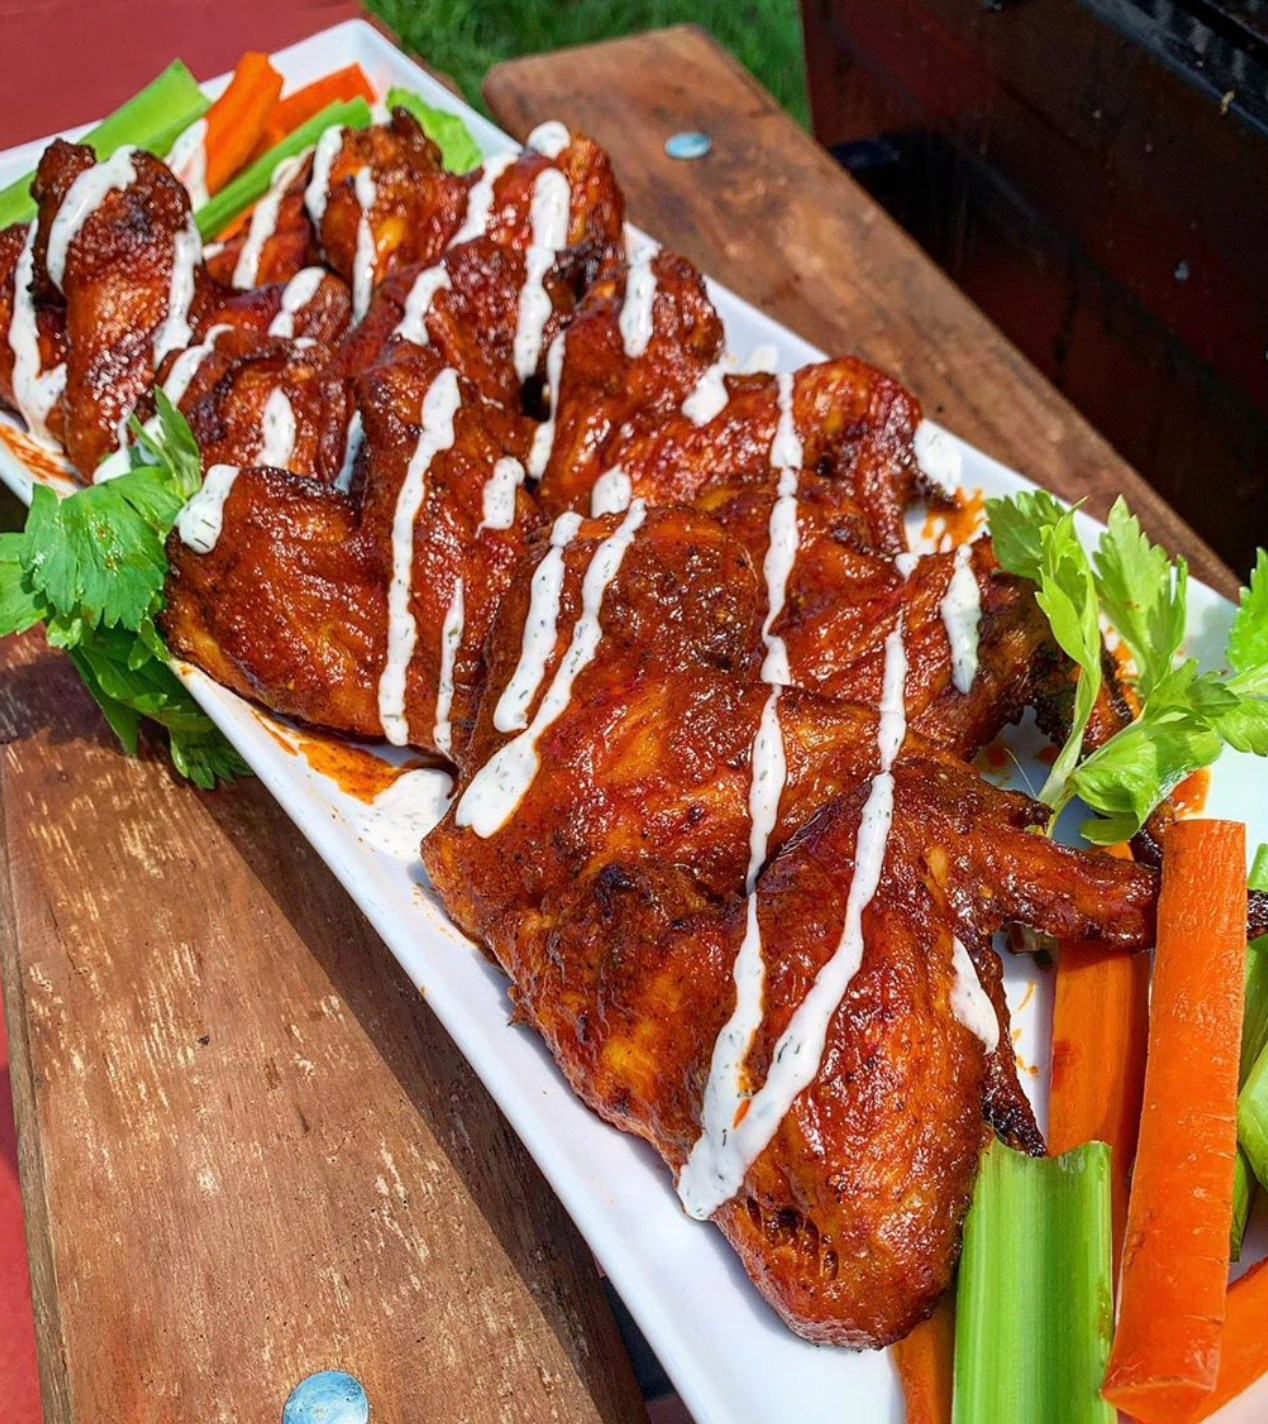 Celebrate National Chicken Wing Day With These Mouthwatering Recipes From Black Chefs